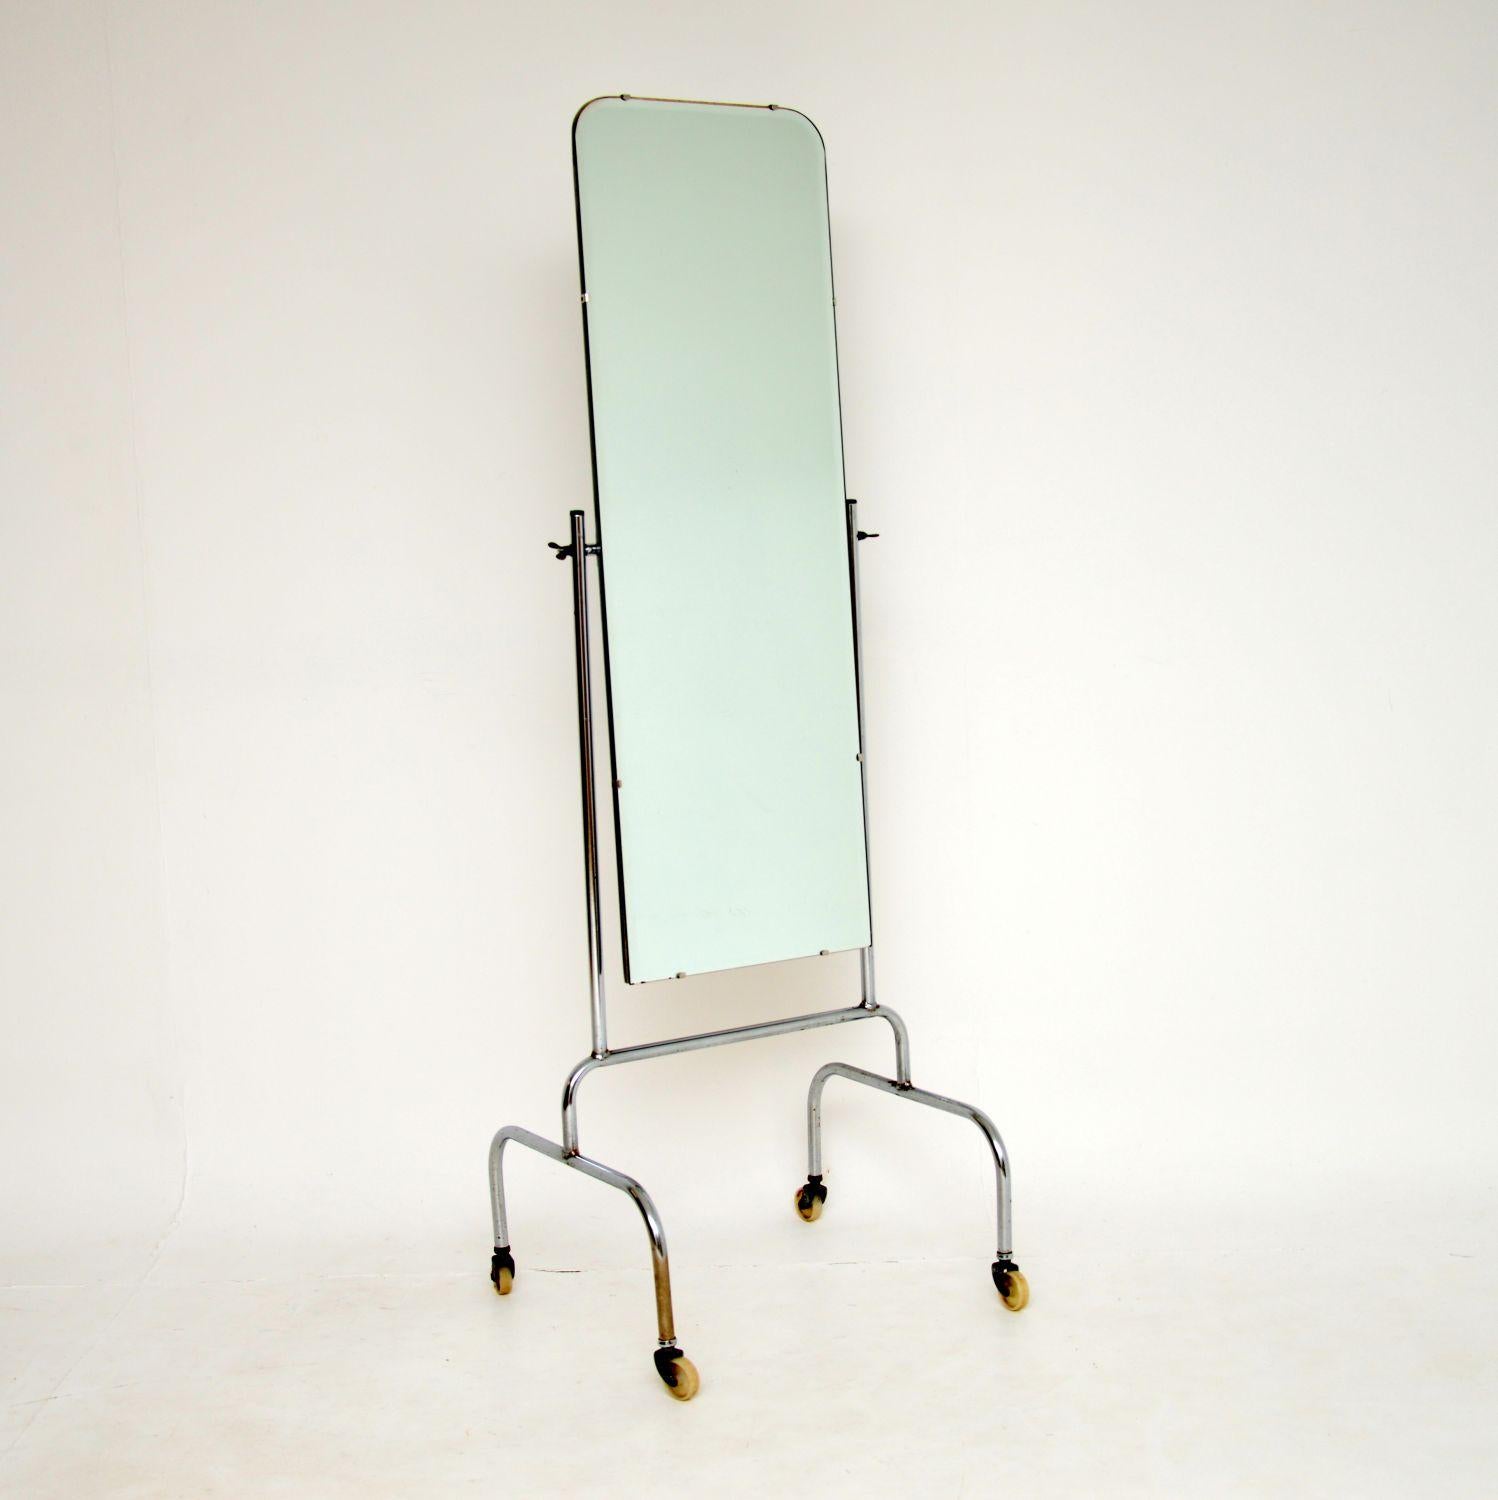 A large and stylish vintage chromed steel cheval mirror on wheels. This was made in England, it dates from around the 1970’s.

It has a great industrial feel, and would look equally great at home or in a fashion retail shop. It is of great